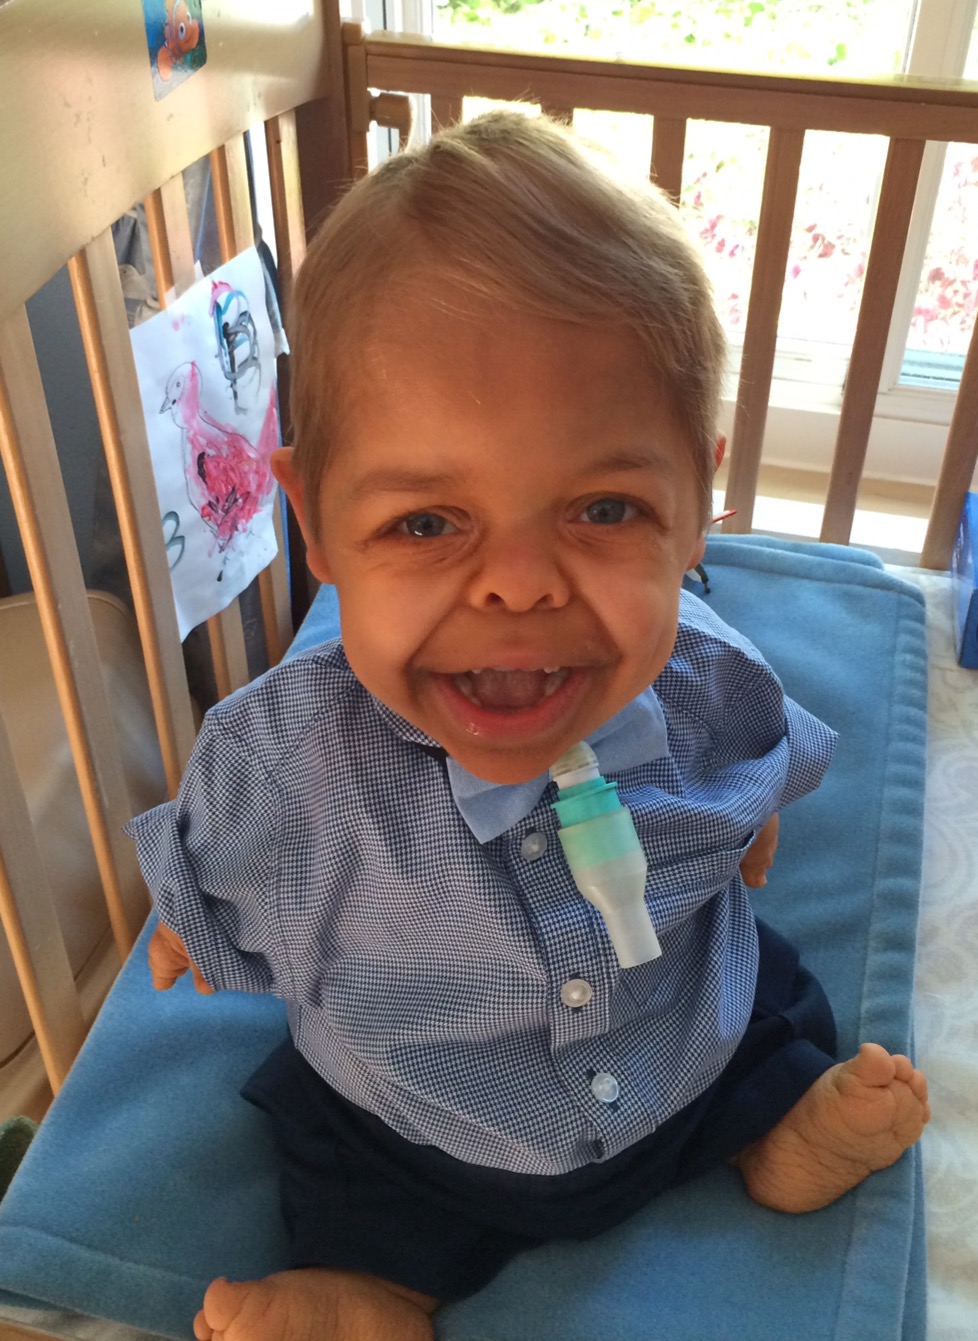 son with dwarfism smiling